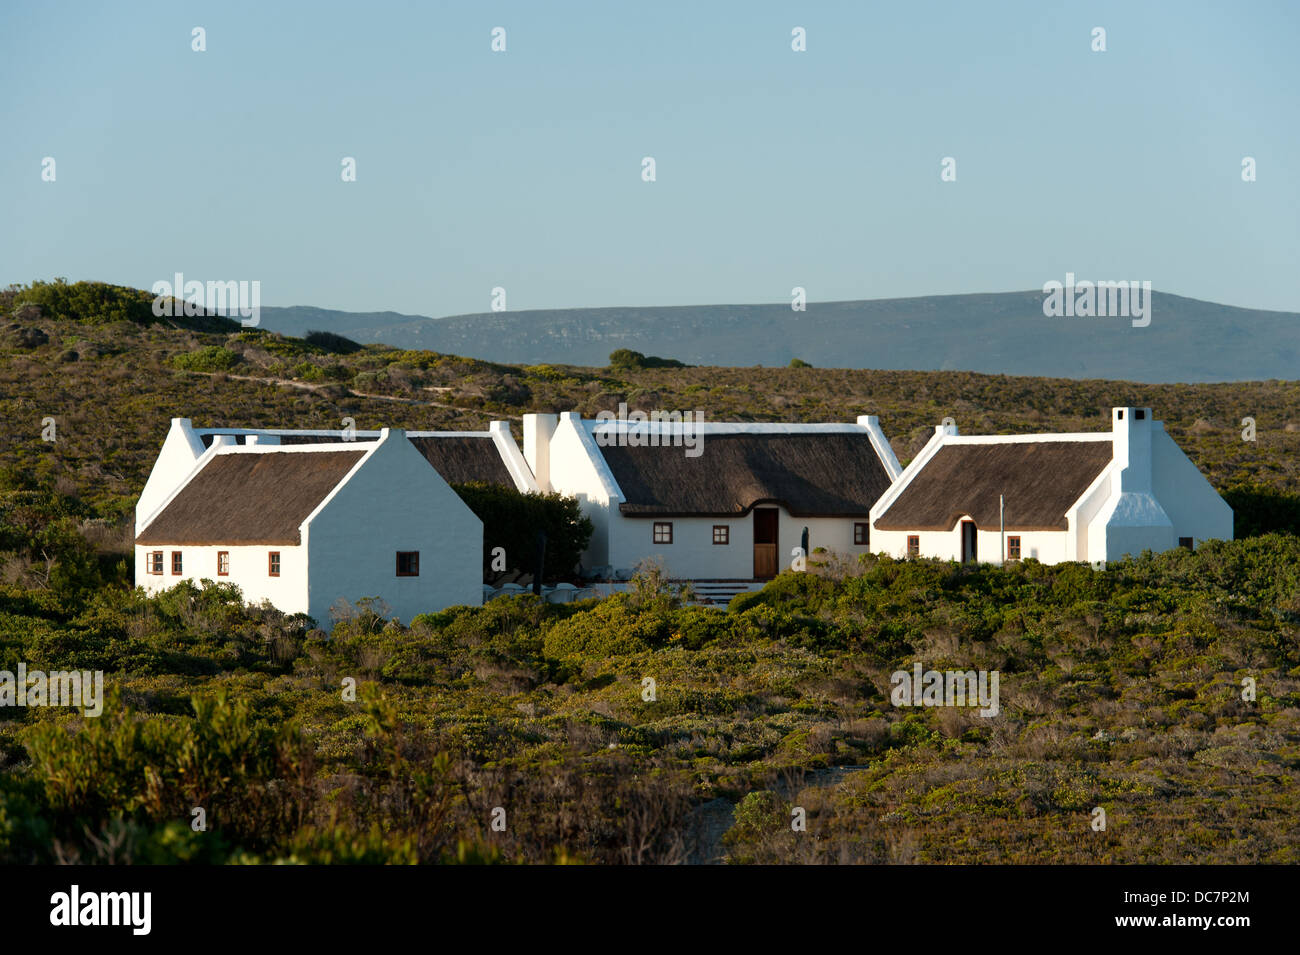 Koppie Alleen accommodation, De Hoop Nature Reserve, Western Cape, South Africa Stock Photo